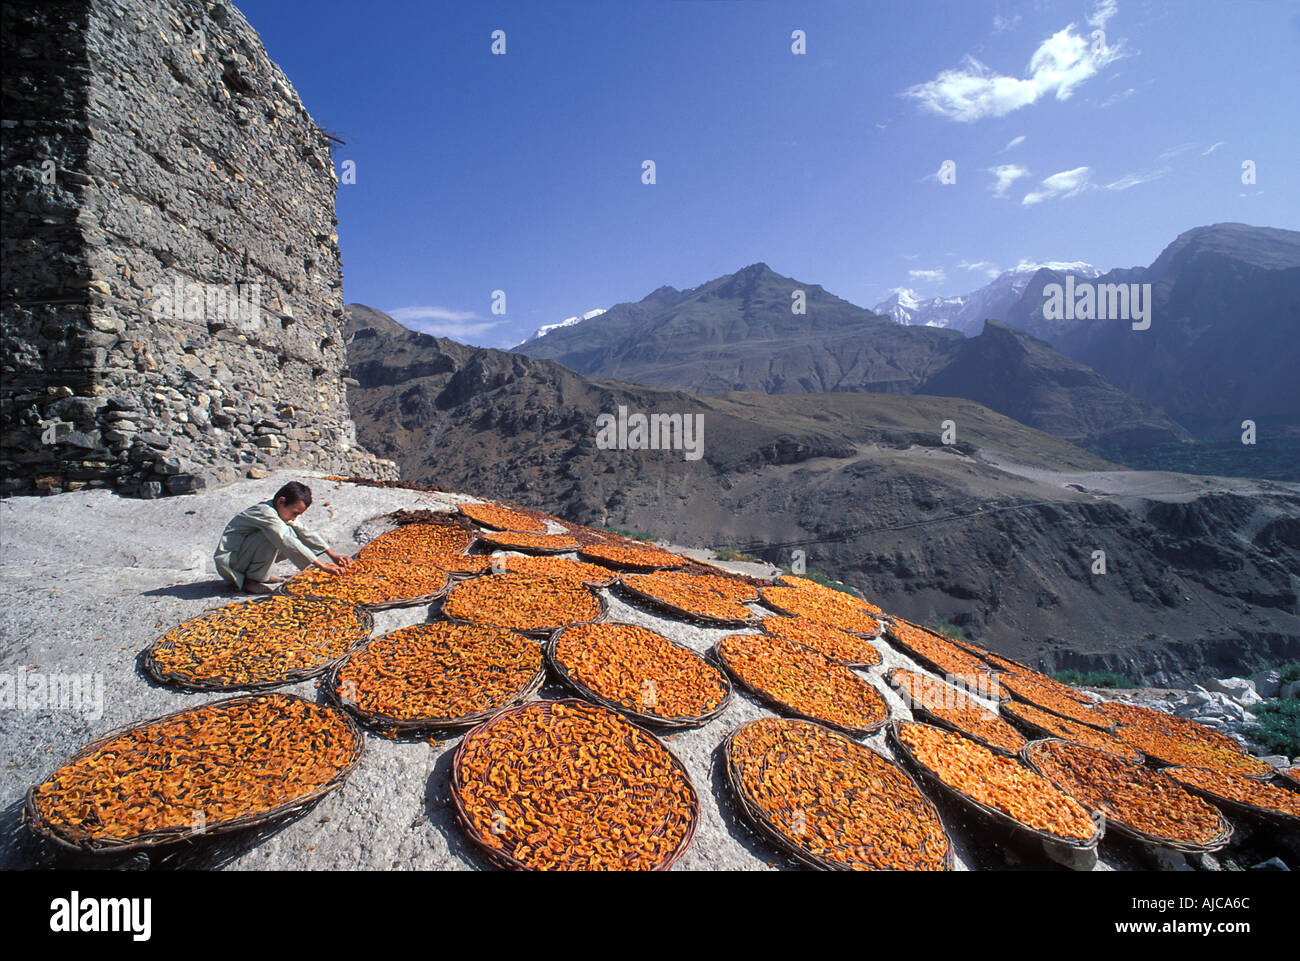 PAKISTAN Sunbaked Apricots laid in baskets to dry Altit Fort Karimabad Hunza Valley Karakoram Highway Pakistan Stock Photo